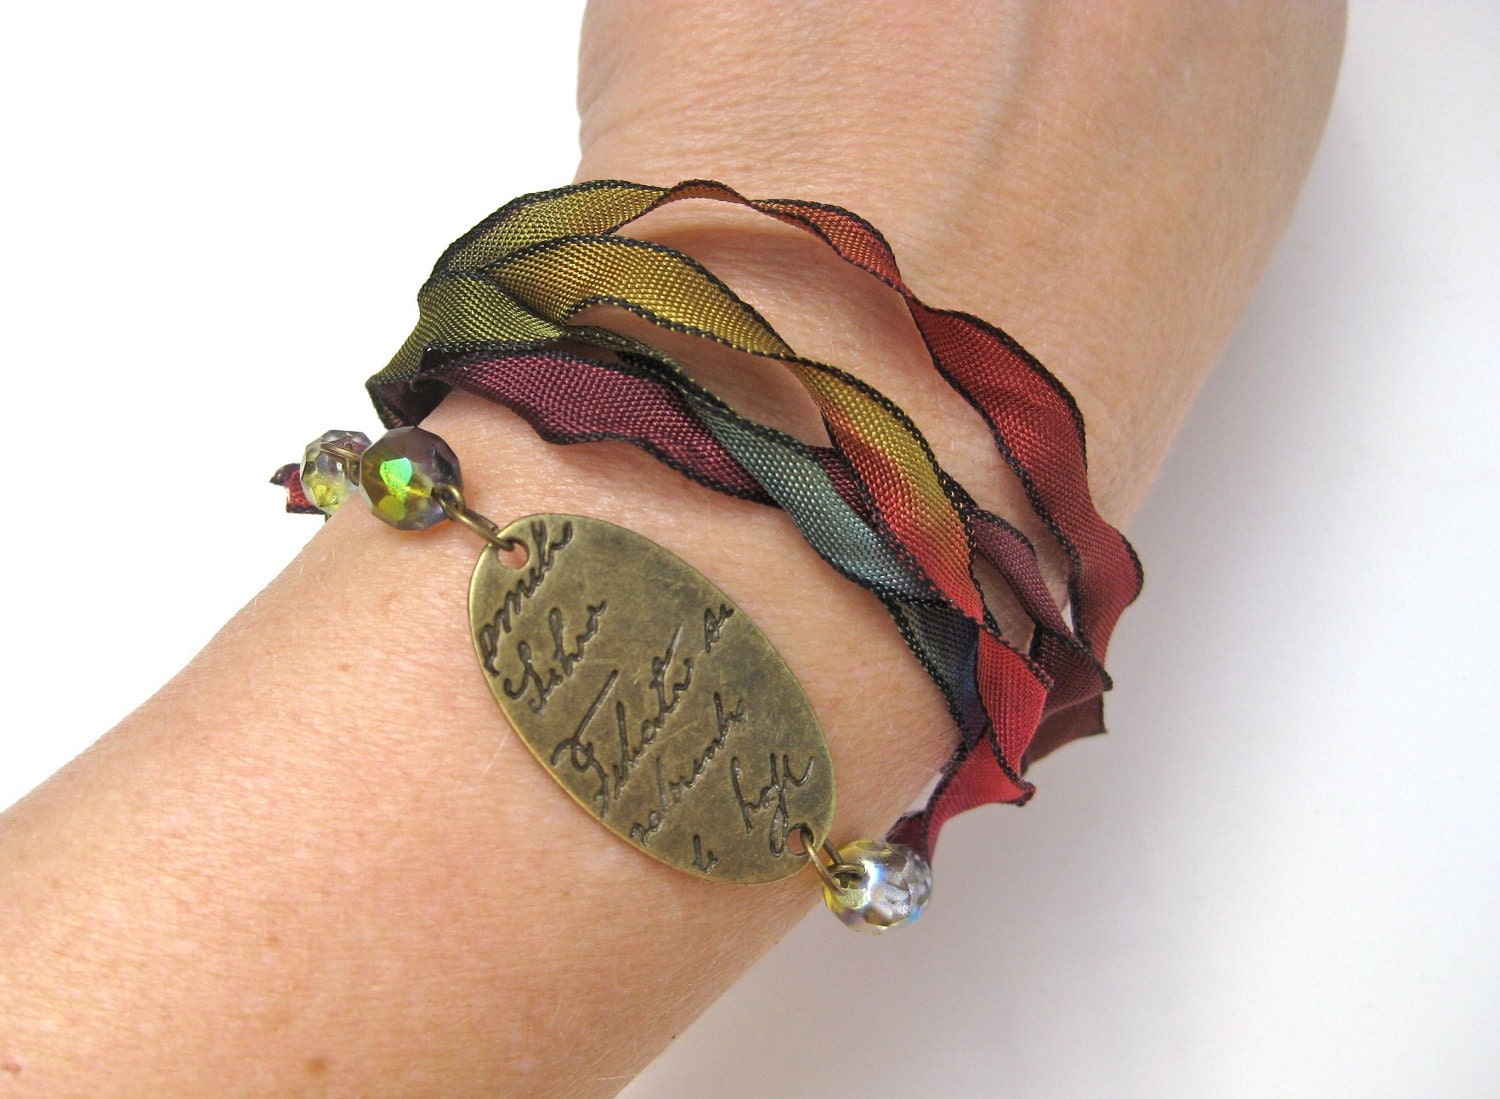 Poetry - Romantic ribbon bracelet in purples, greens, reds, and rusts featuring an antique brass charm with beautiful script - CheekyChickDesigns